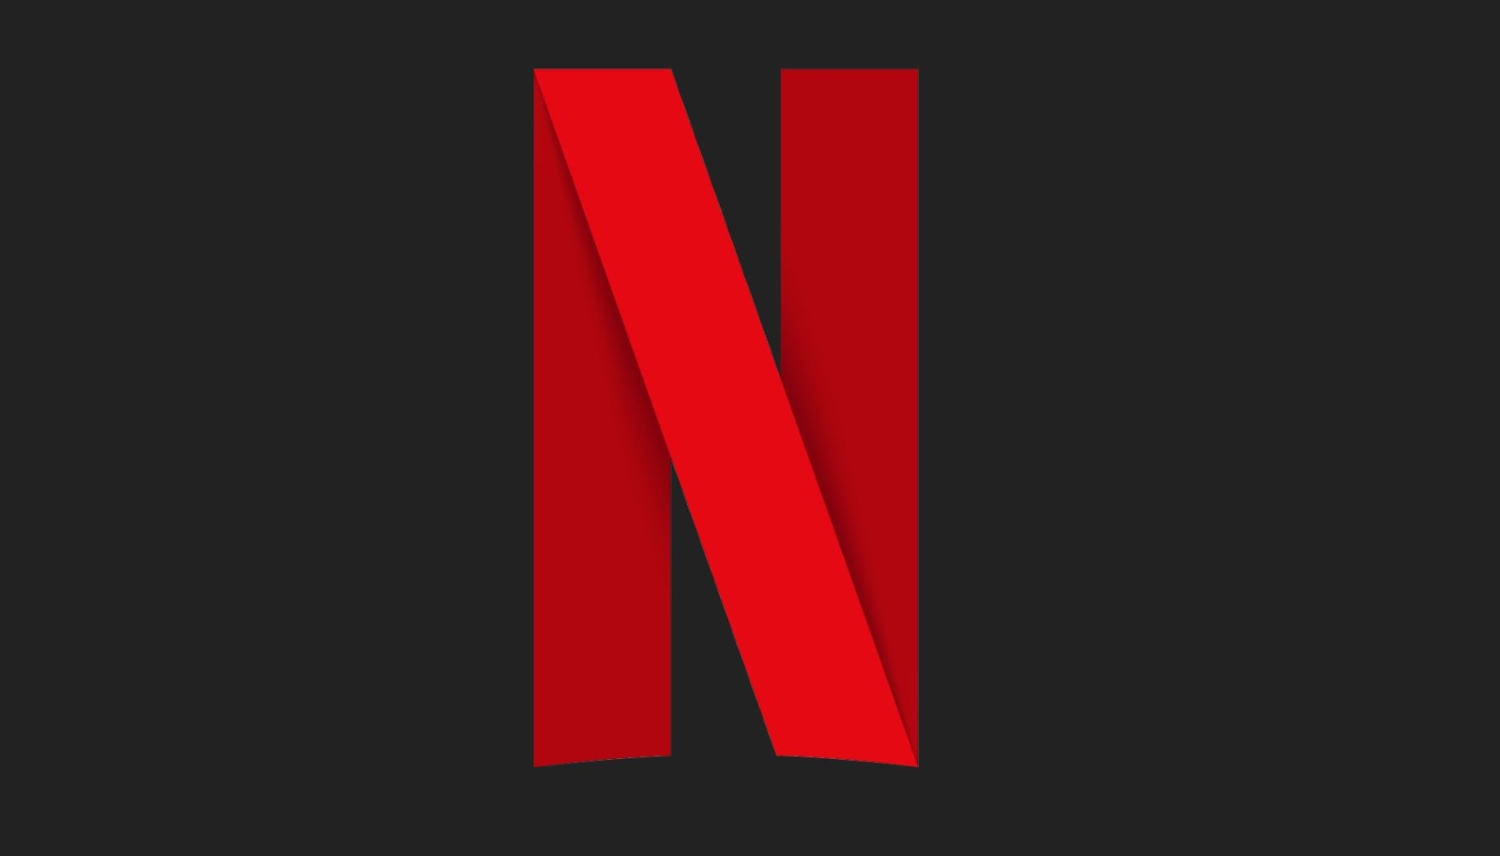 Joseph Staten joined Netflix to develop a AAA Video Game